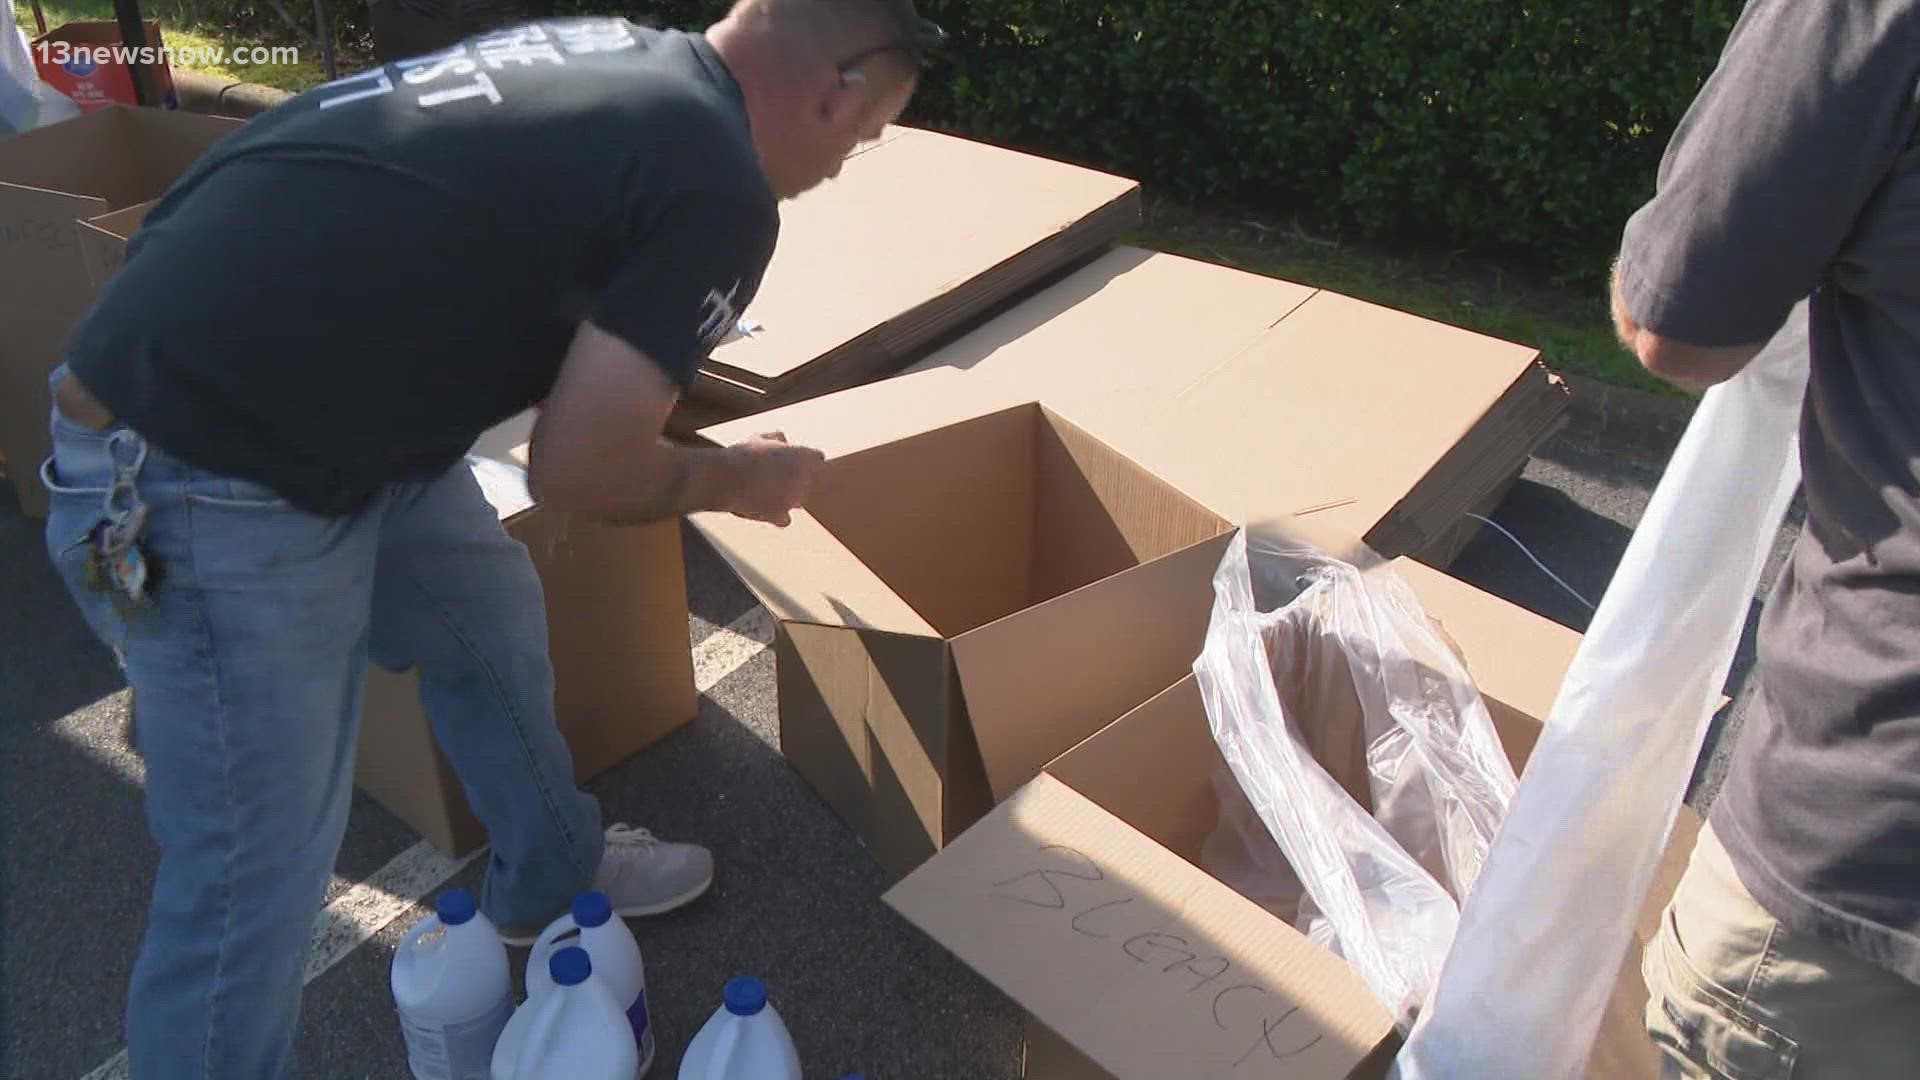 A donation drive was held at Essential Church in Virginia Beach on Sunday.